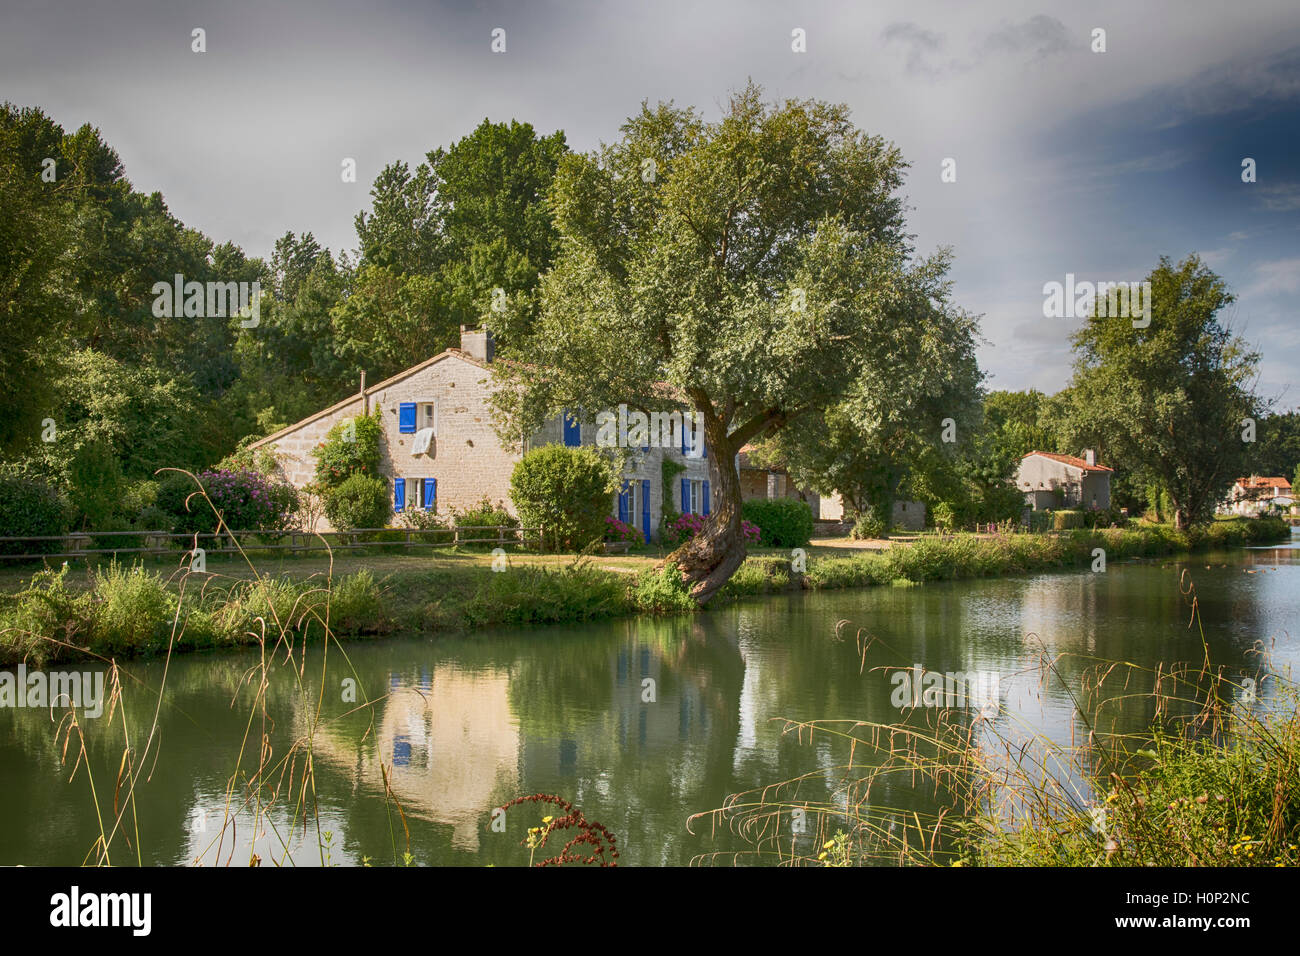 Riverside House on the River Sevre near Coulon, central France Stock Photo